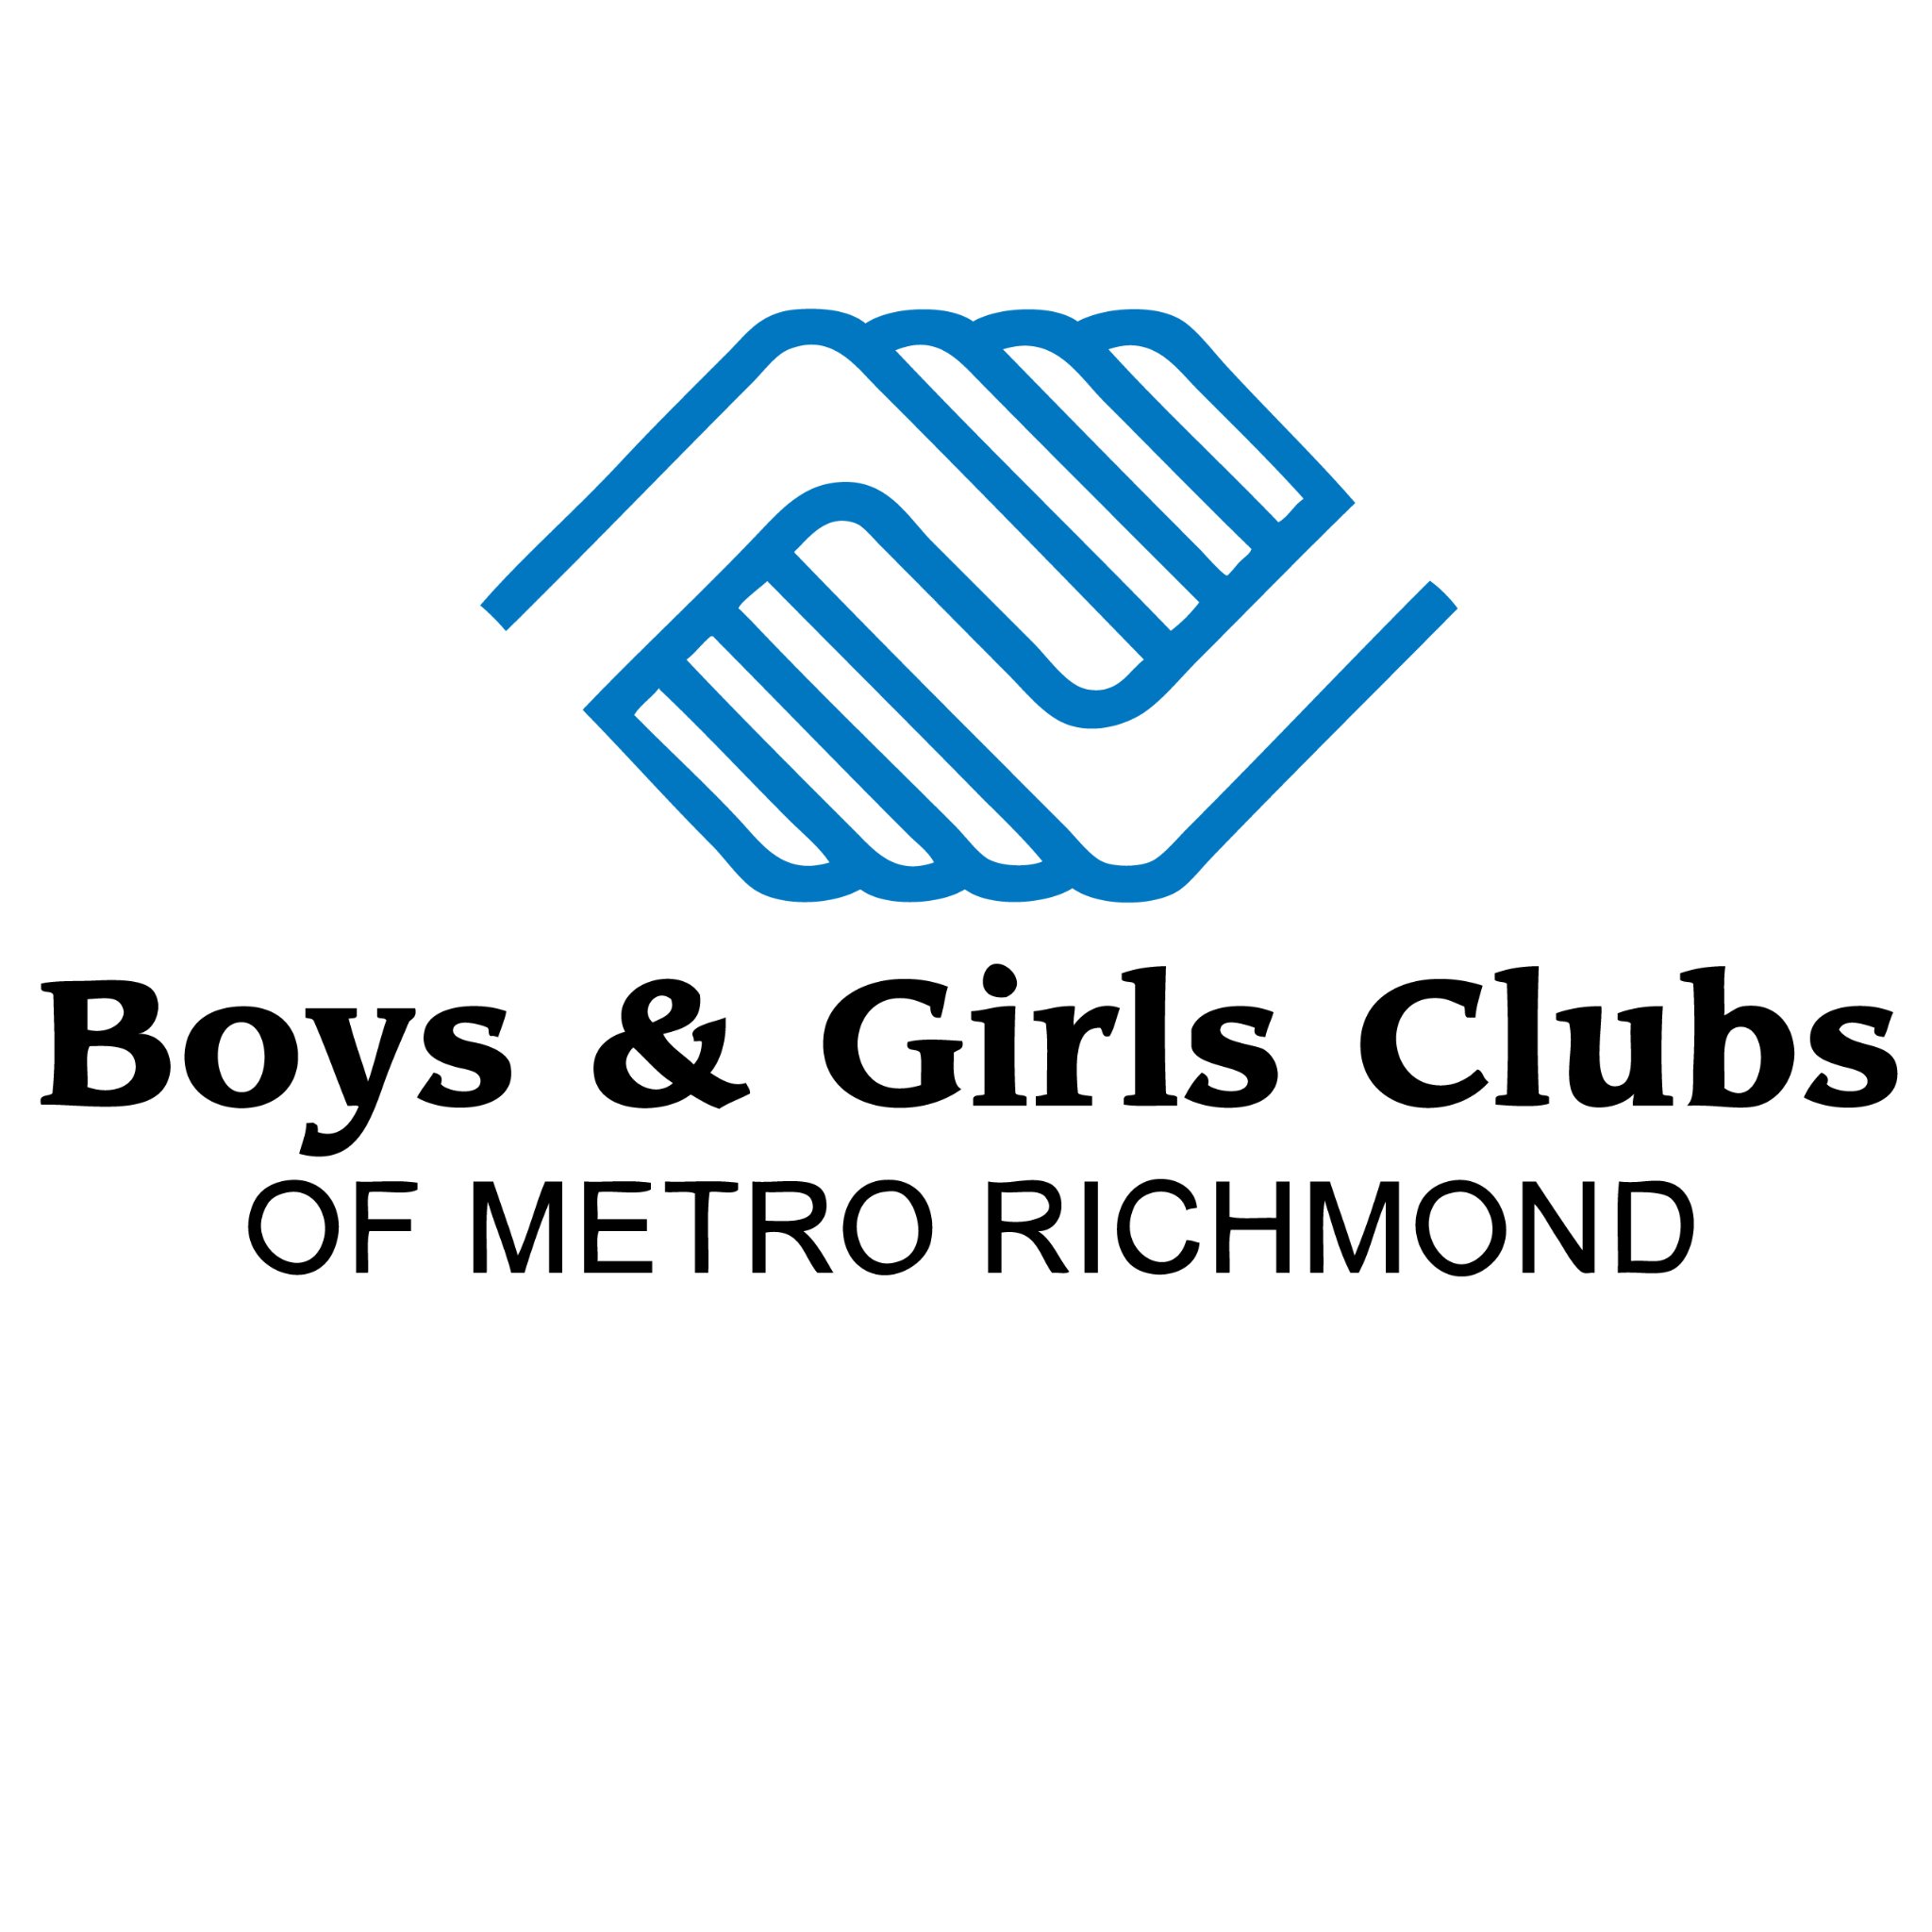 The Official account of Boys & Girls Clubs of Metro Richmond. We proudly serve the youth of Northside, East End, Southside & Petersburg.